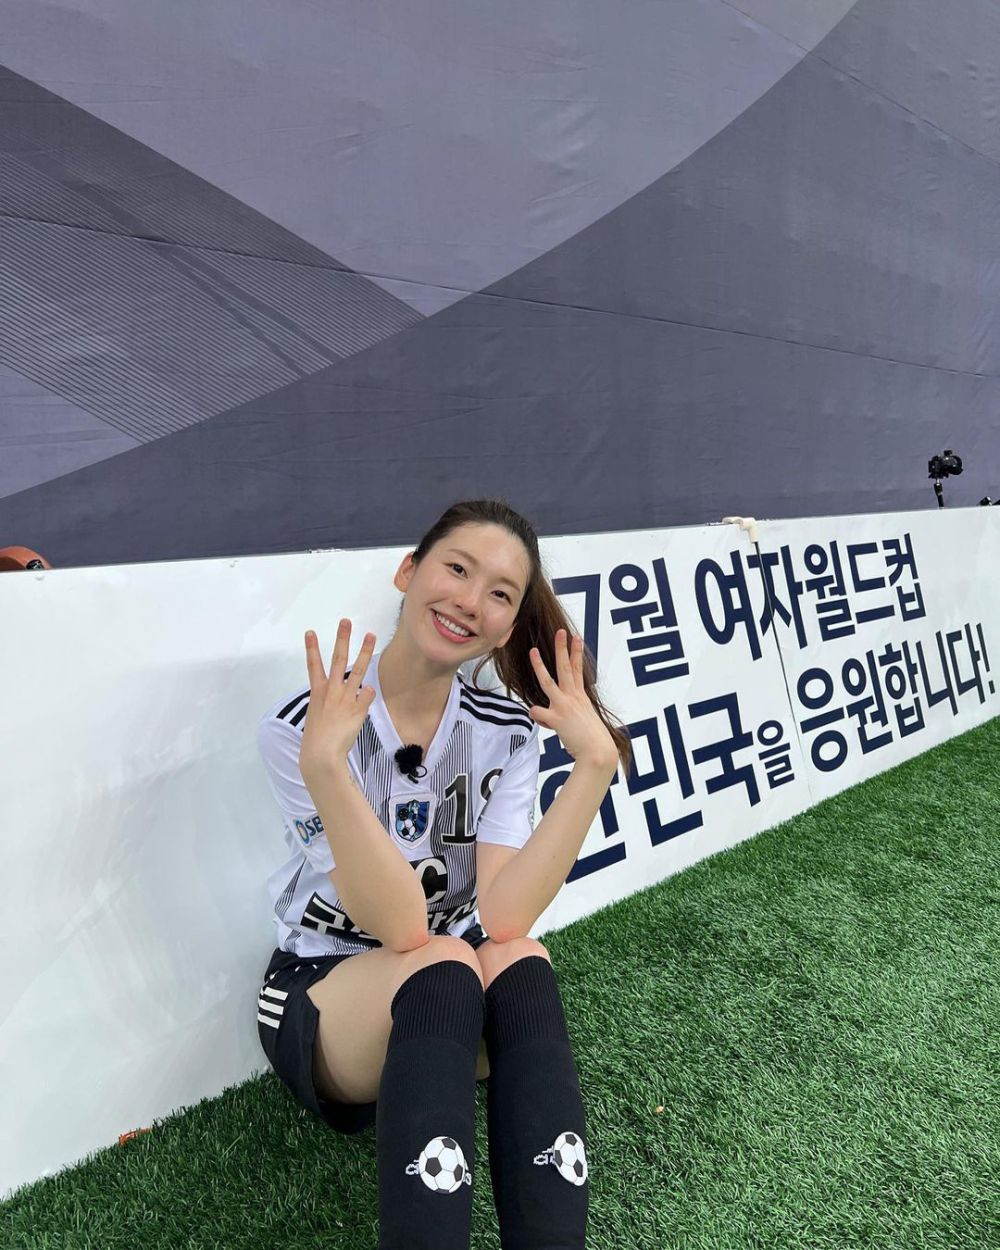 Biodata And Profile Of Kim Jin Kyung, Soon To Marry A Pro Goalkeeper